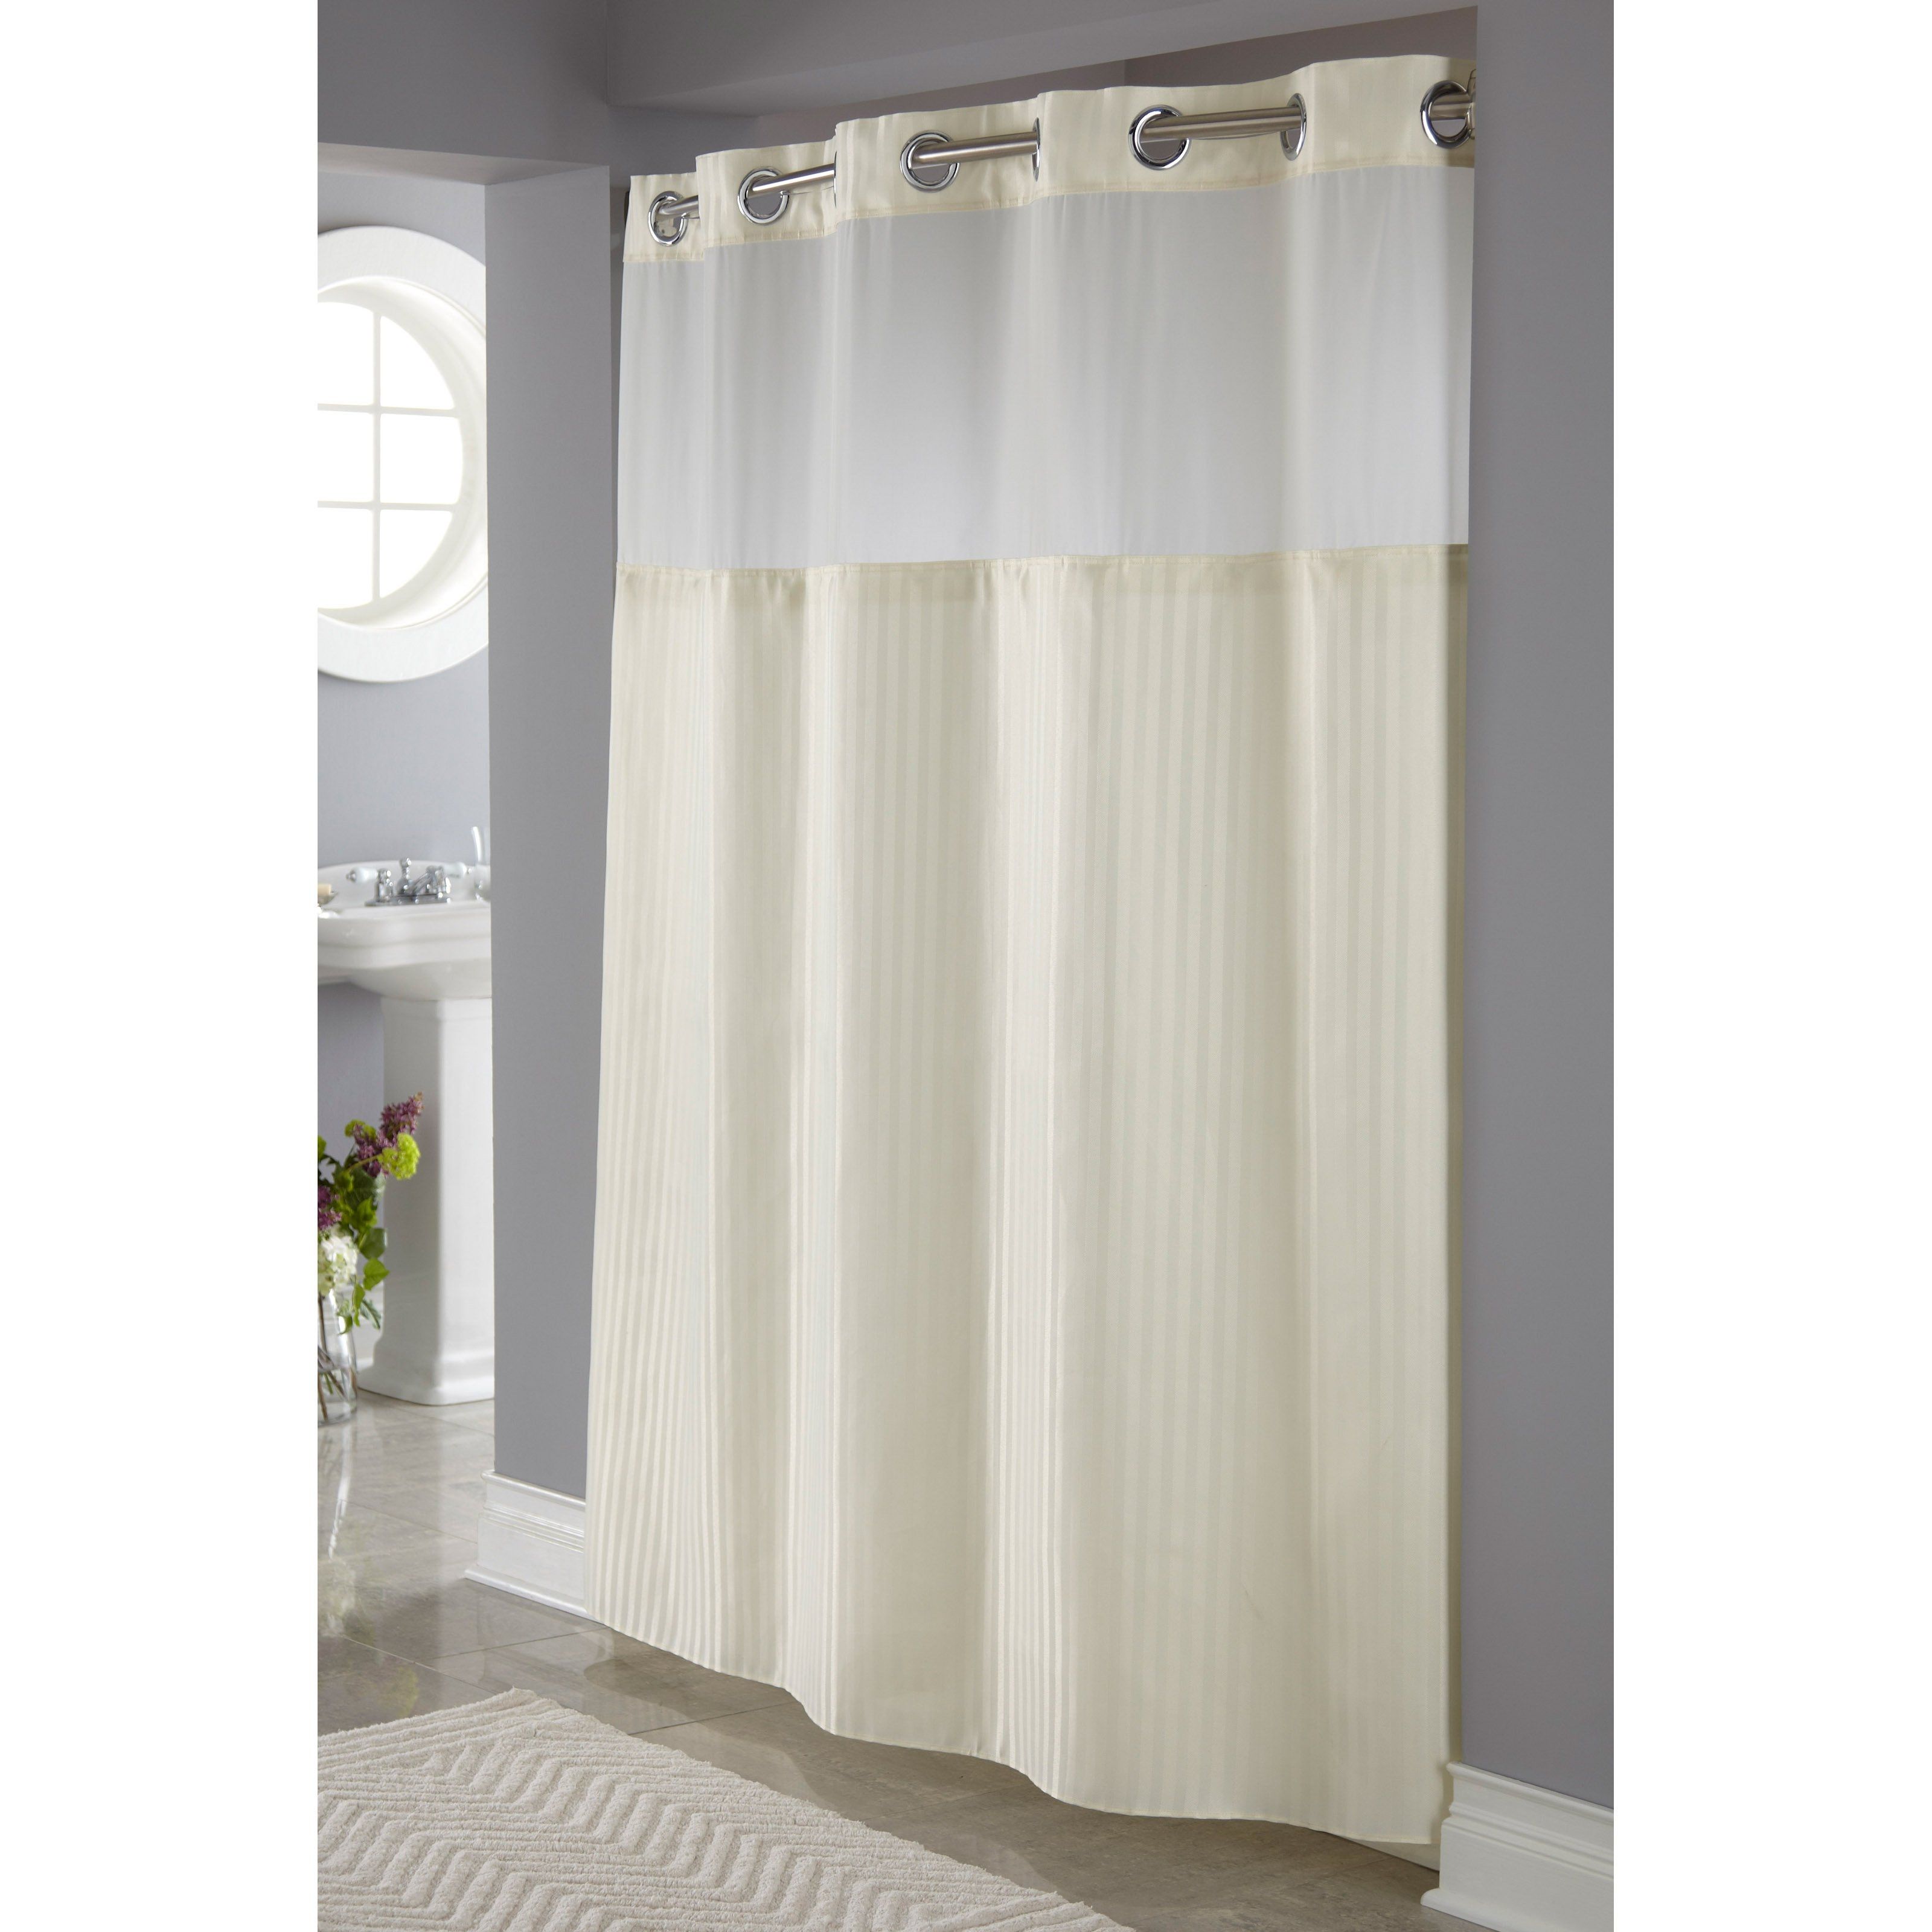 Hookless Beige Herringbone Shower Curtain With Its A Snap Fabric Throughout Hookless Fabric Shower Curtain Liner (View 6 of 25)